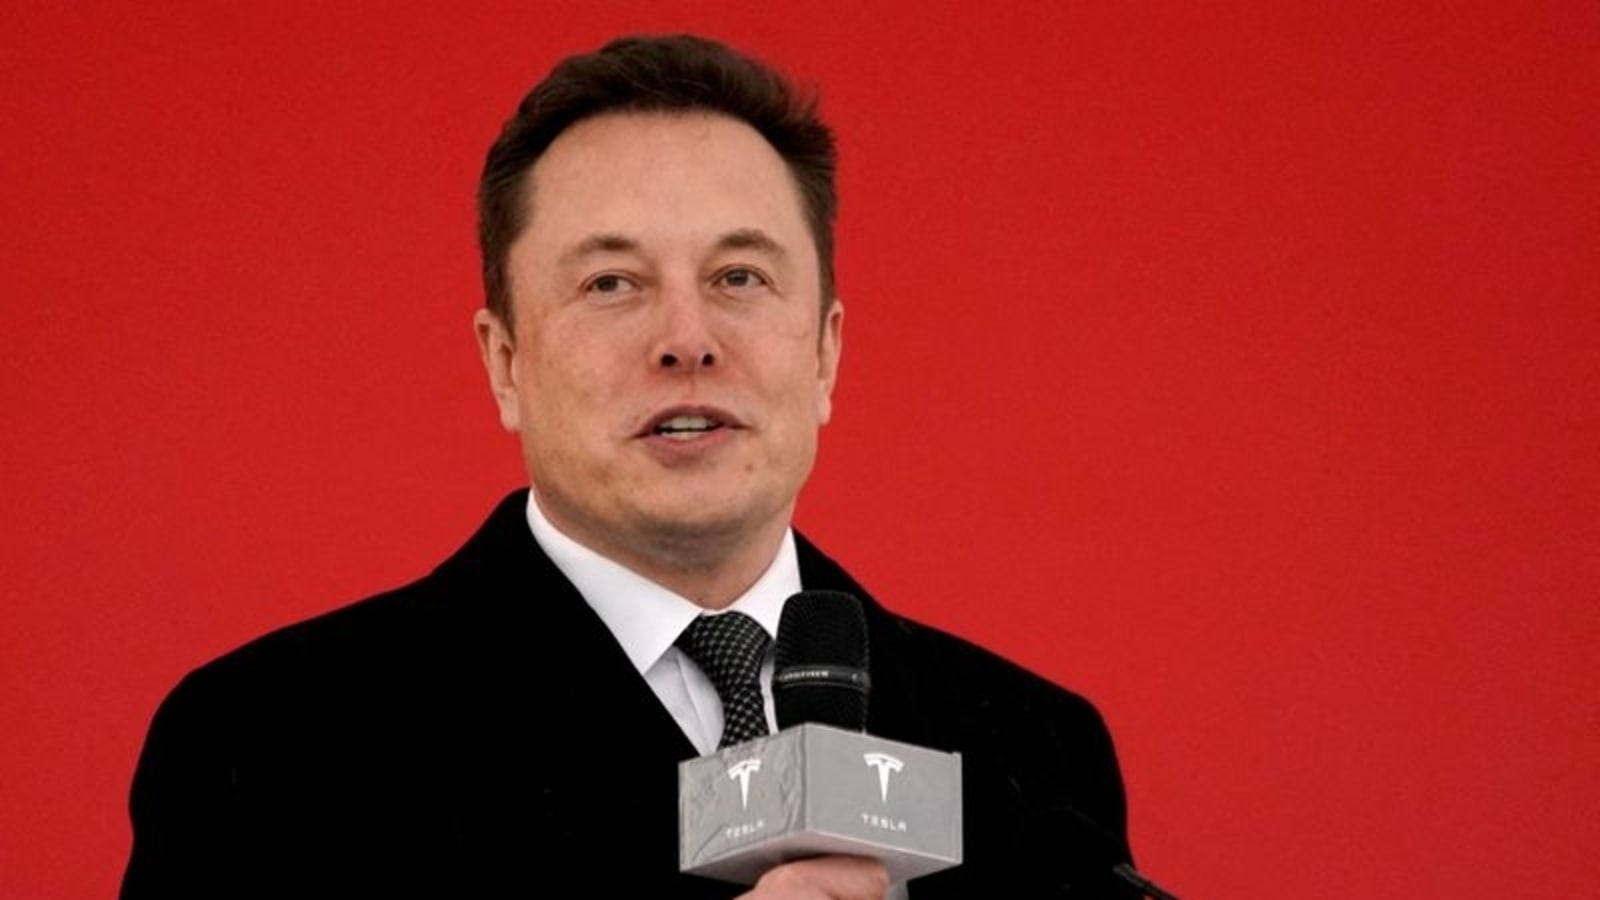 Musk says Tesla may have ‘Optimus’ robot prototype within months